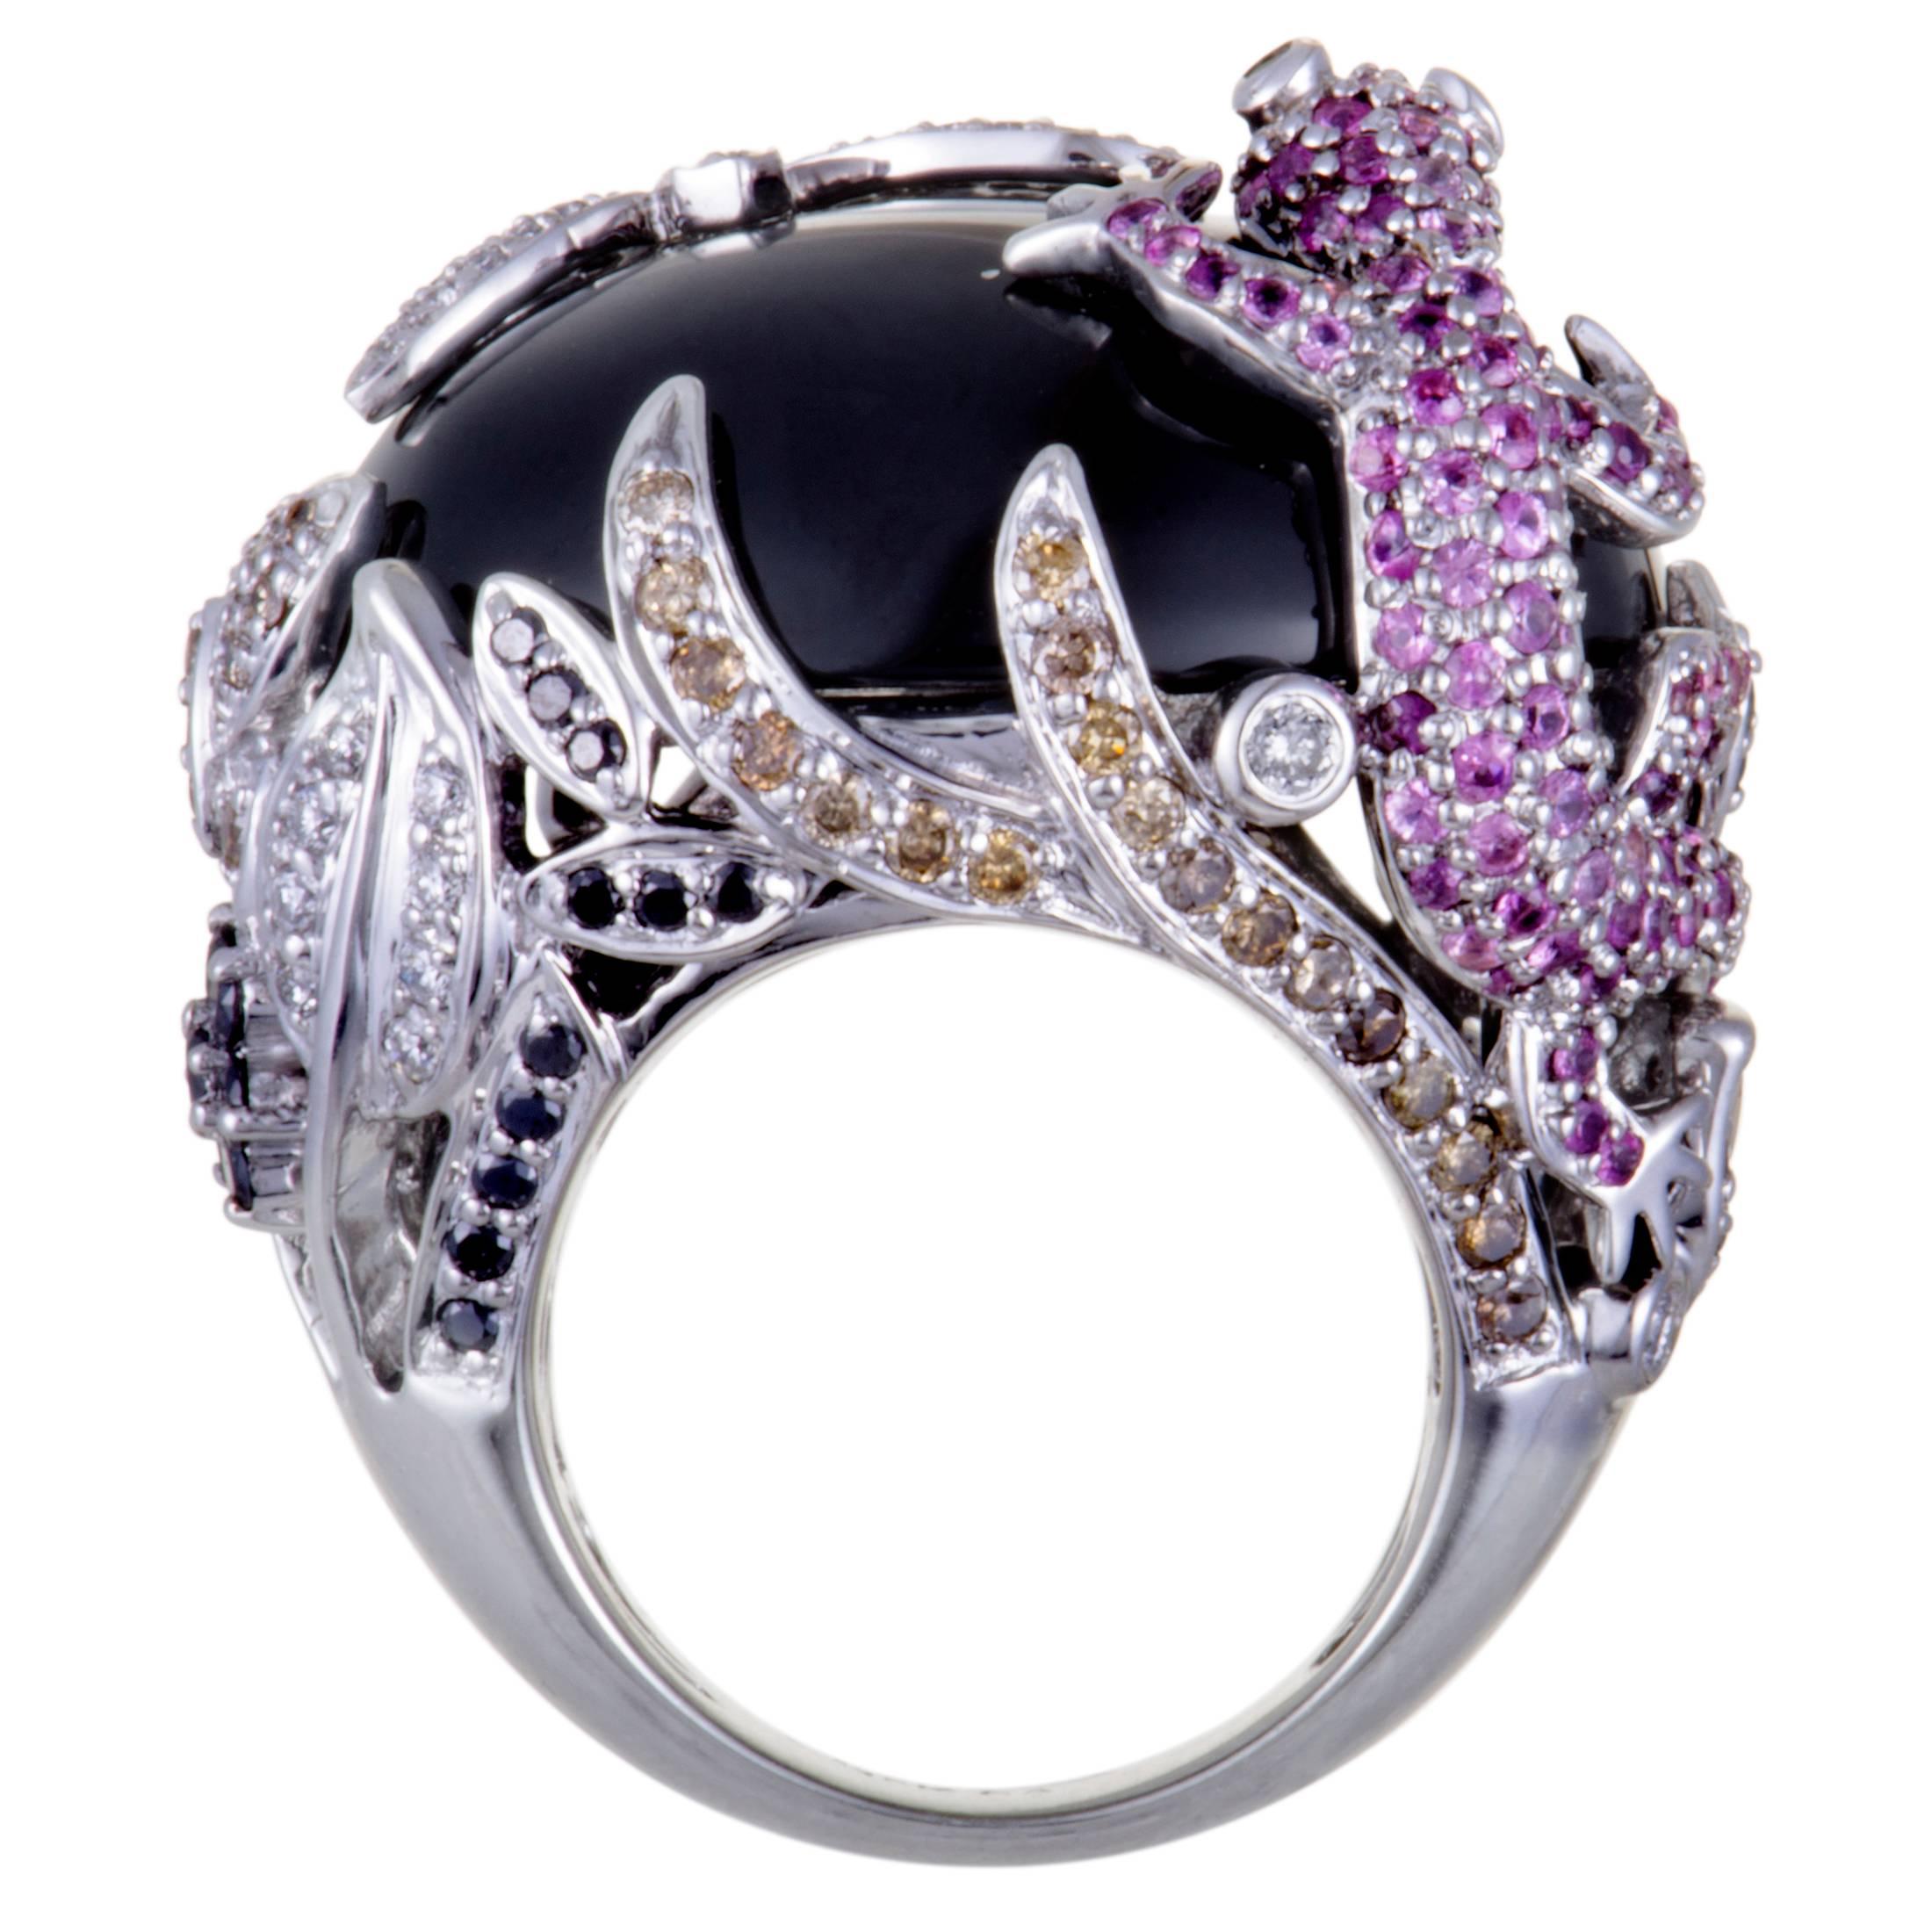 Women's Diamond Sapphire and Onyx White Gold Lizard Dragonfly Ring